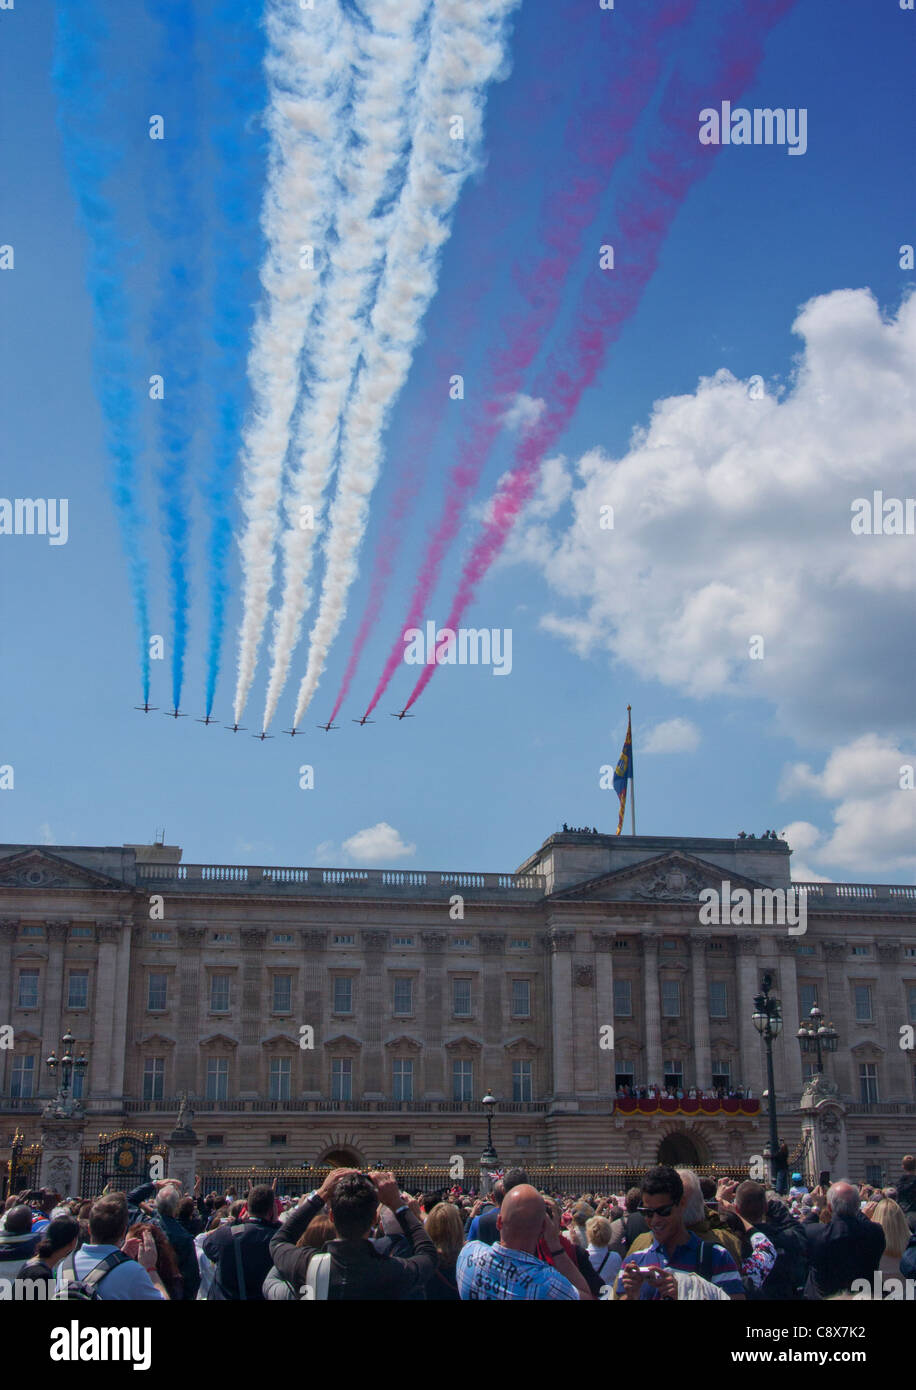 Trooping the Colour Red Arrows flying past Buckingham Palace with red, white and blue vapour trails in sky London England UK Stock Photo